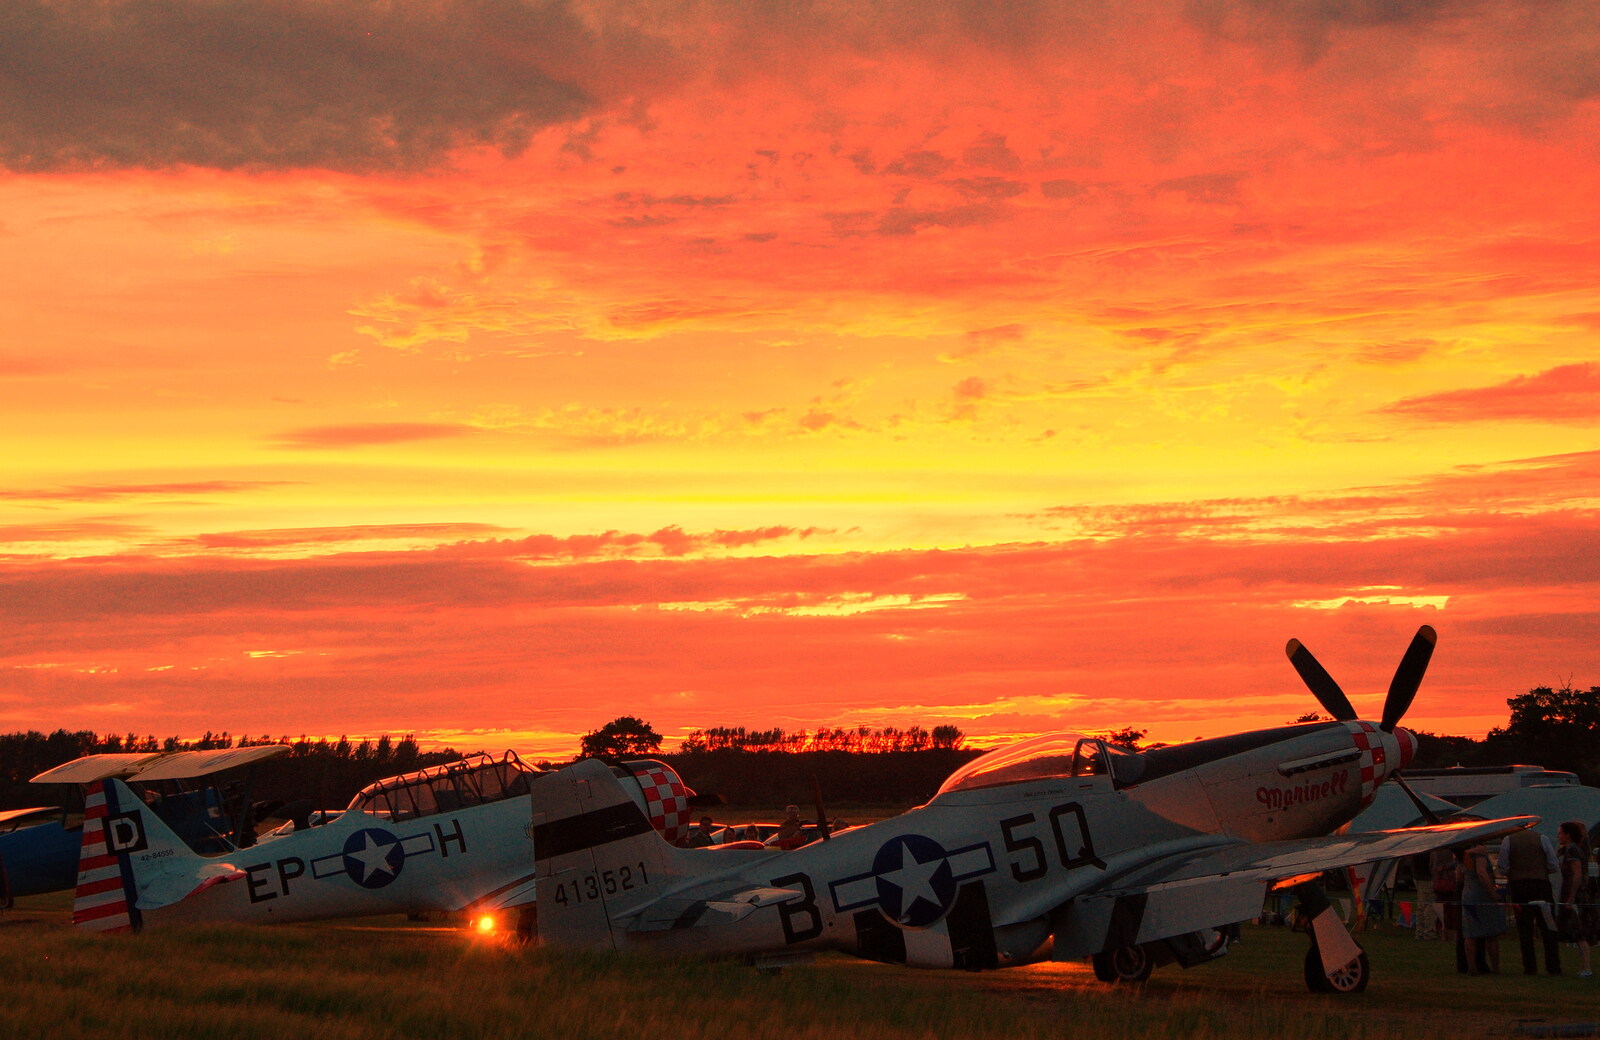 The Harvard and Marinell, and a great sunset from "Our Little Friends" Warbirds Hangar Dance, Hardwick, Norfolk - 9th July 2016